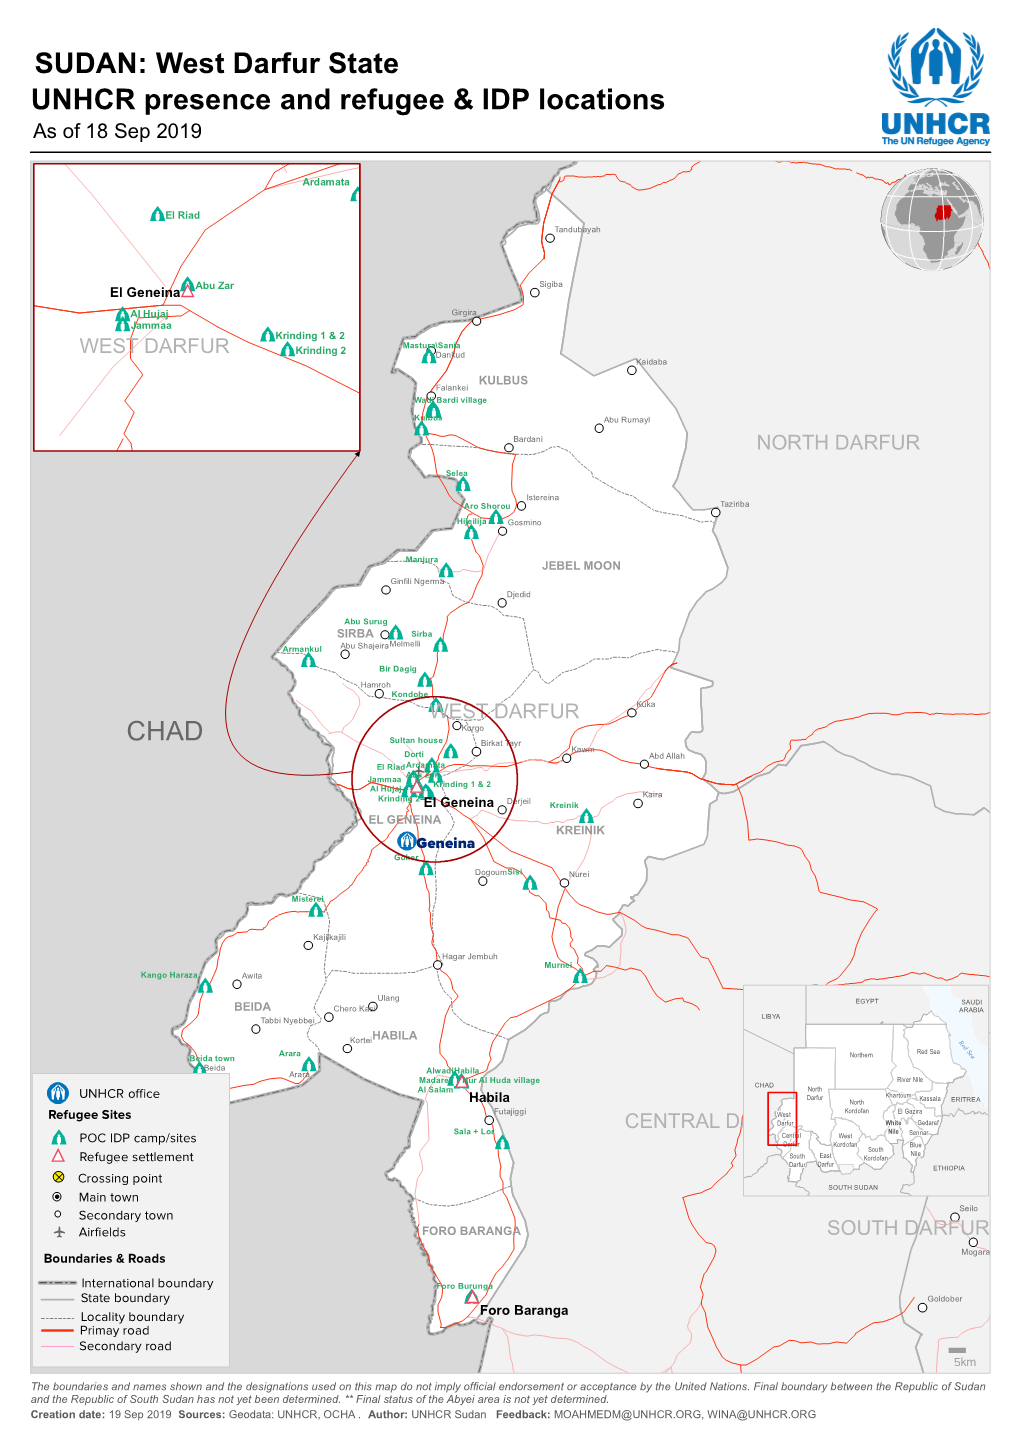 SUDAN: West Darfur State UNHCR Presence and Refugee & IDP Locations